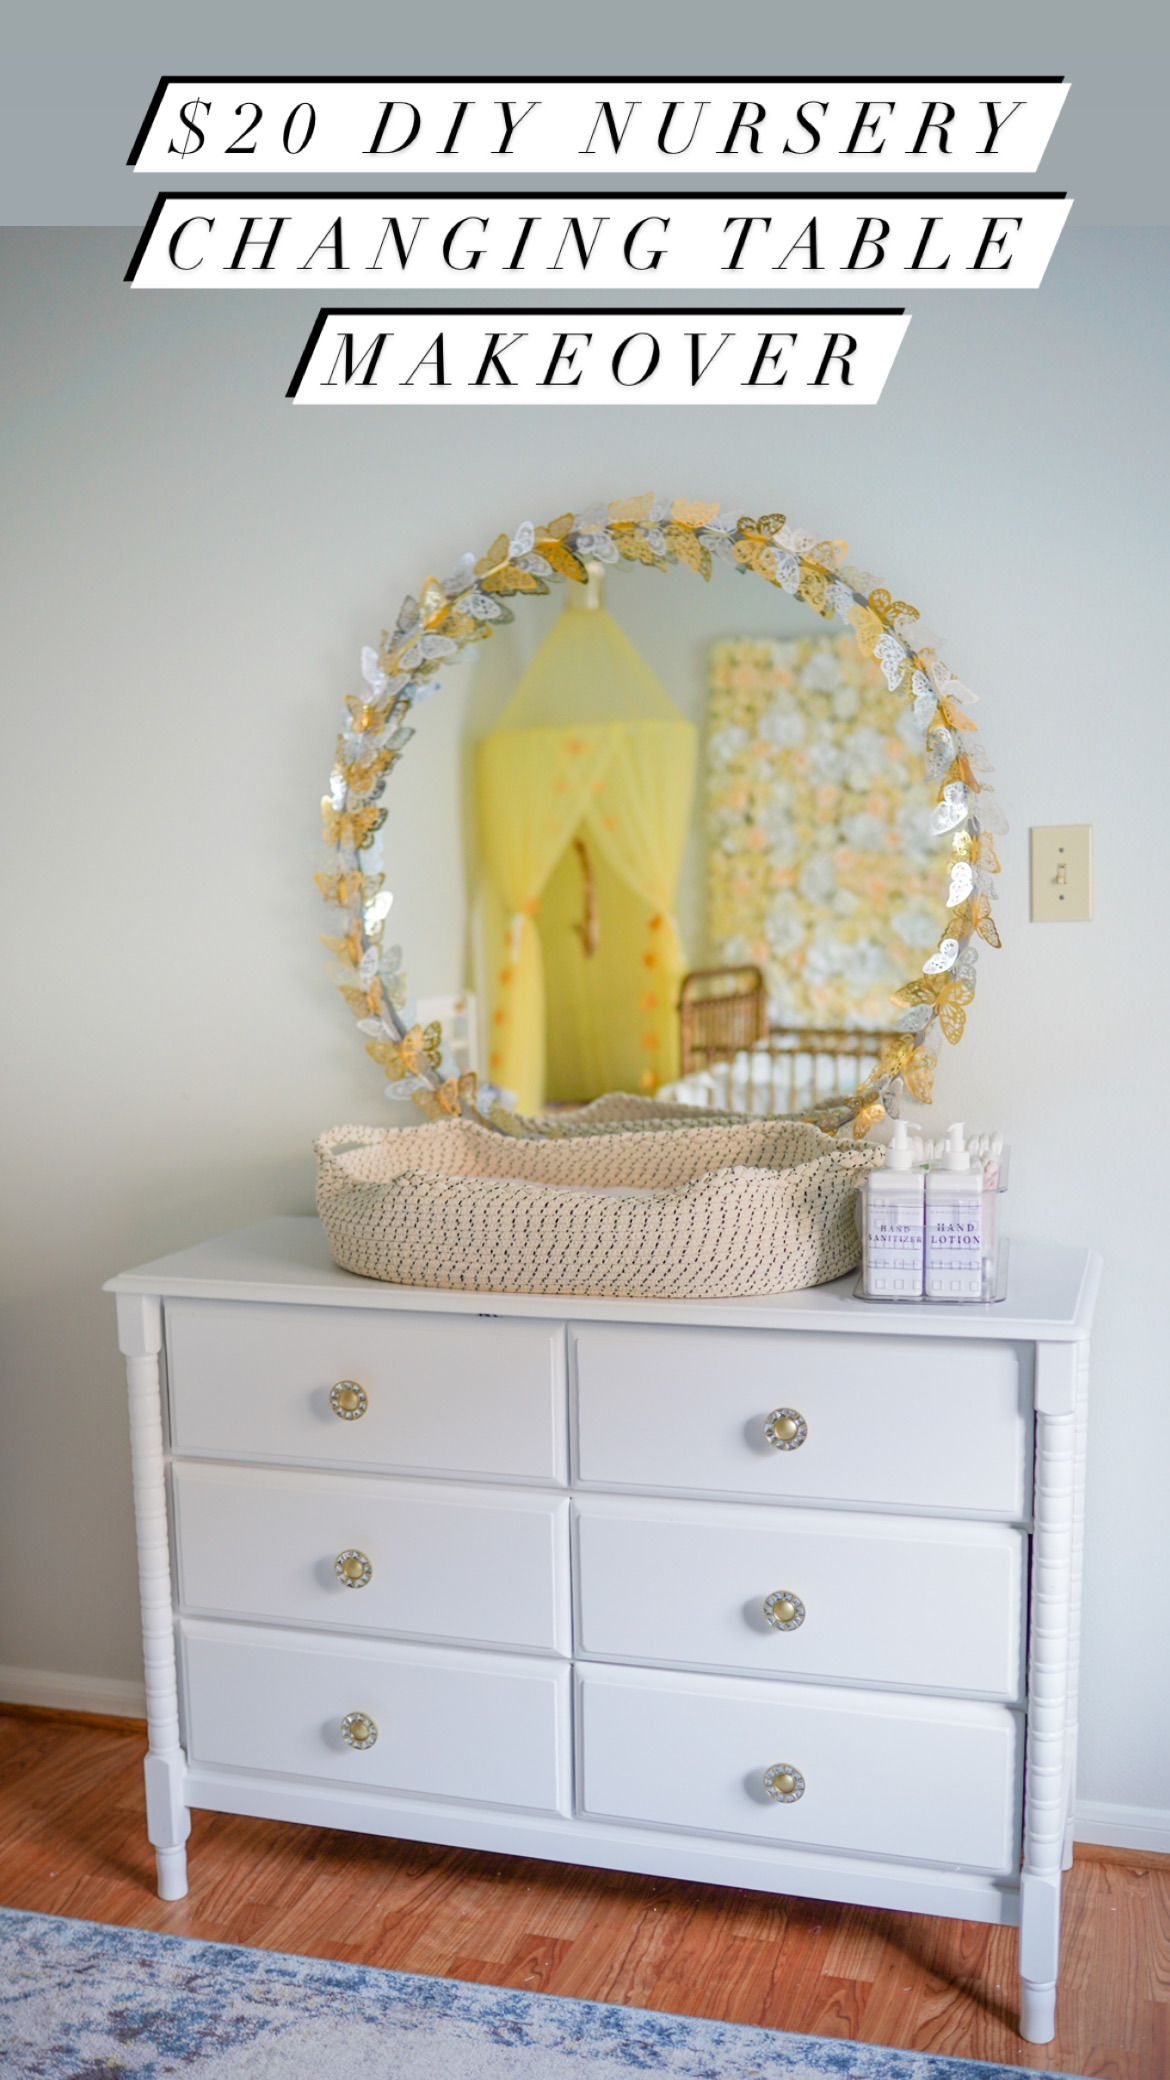  DIY Nursery Changing Table Makeover, gold butterfly mirror, girl's nursery ideas